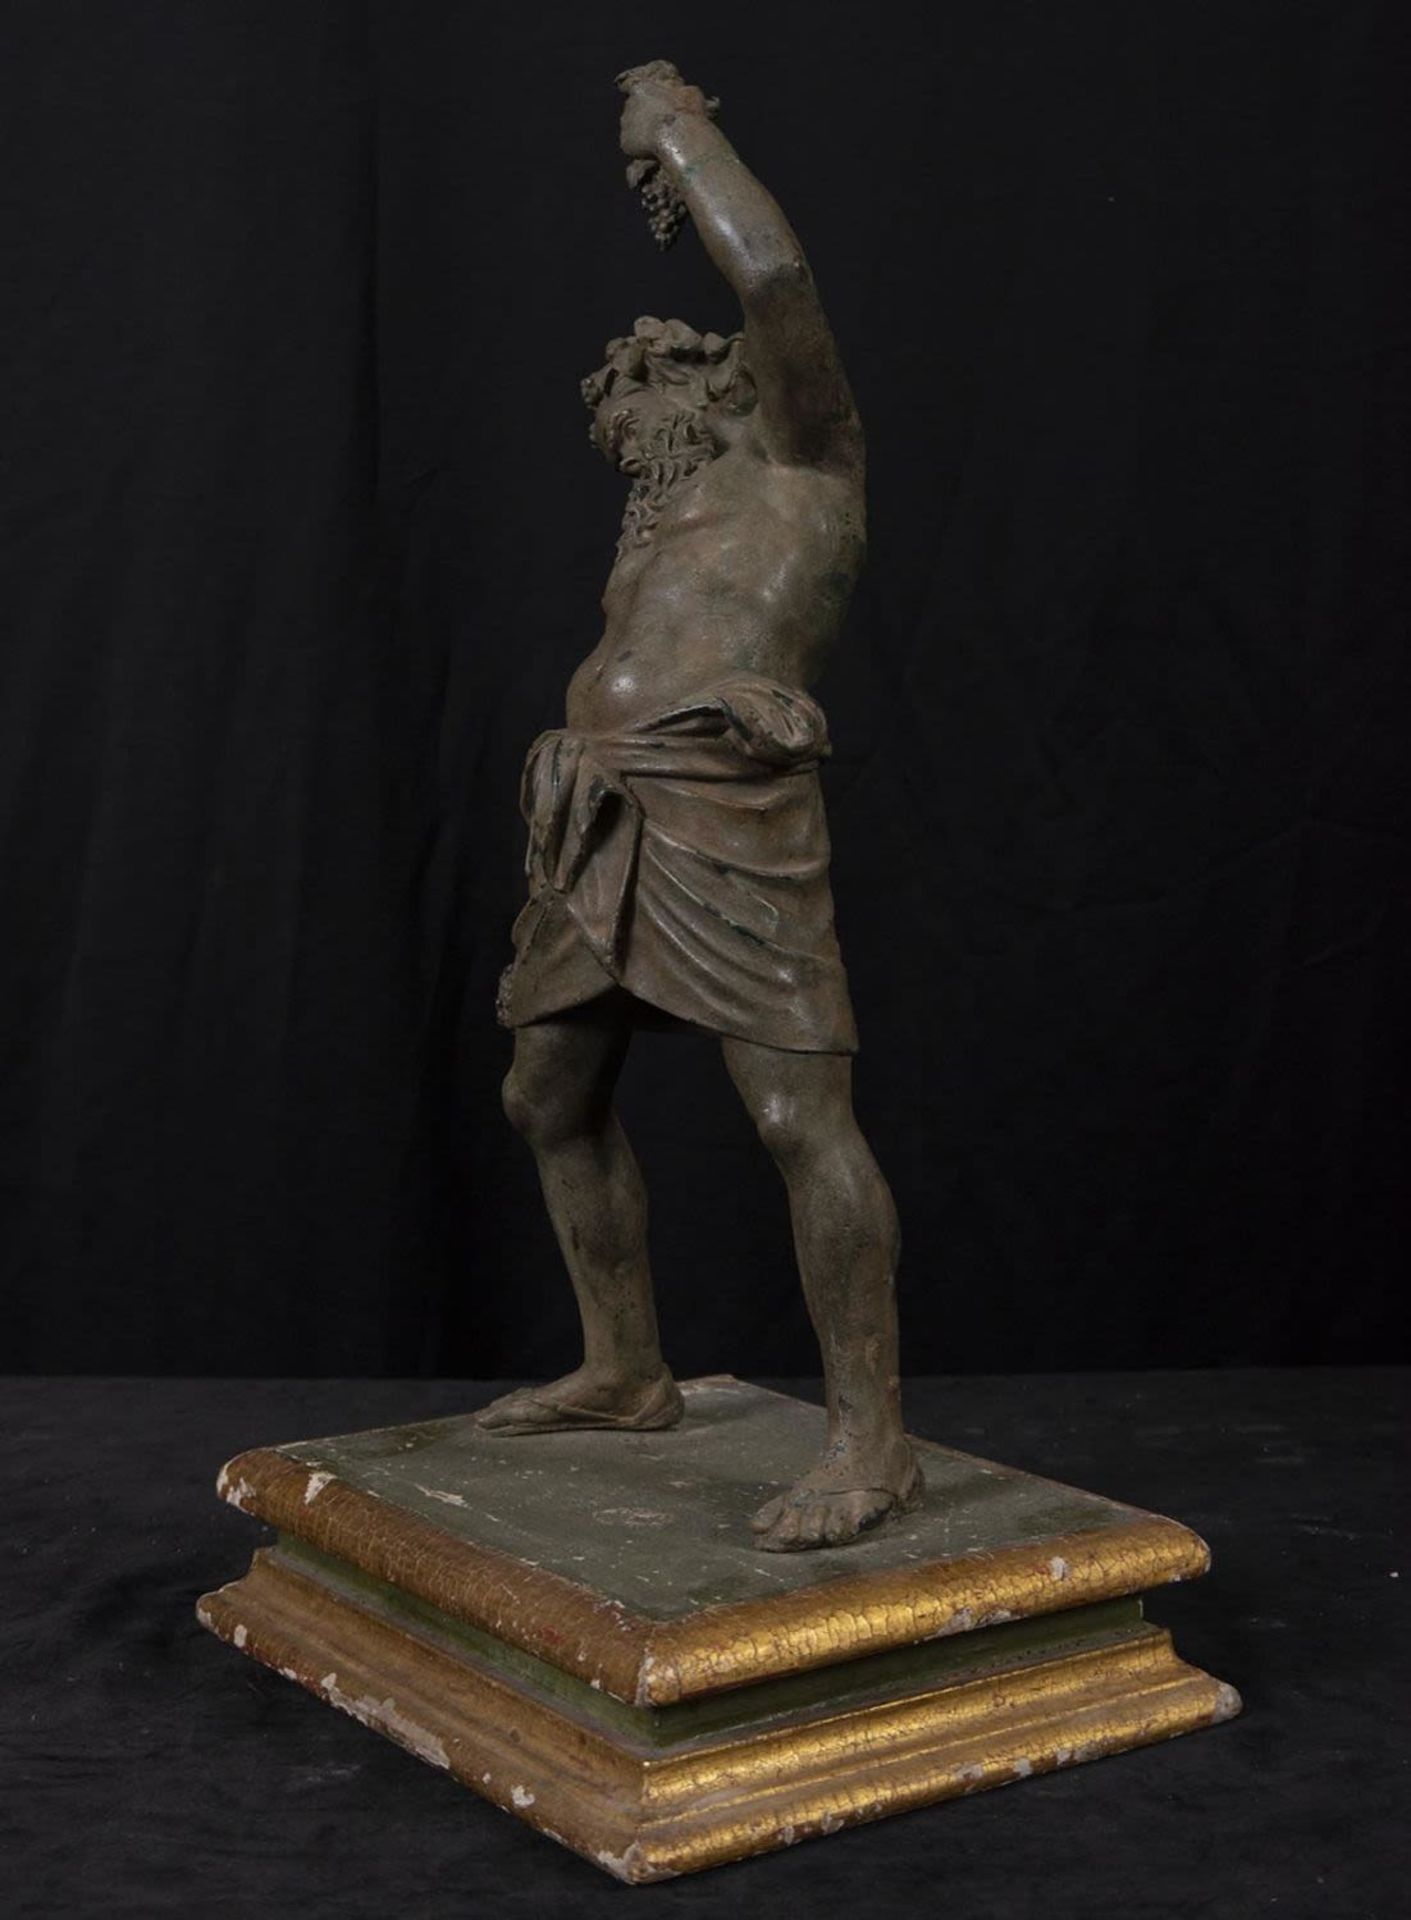 God Bacchus, following models of Classical Rome, Neapolitan foundry from the 19th century - Image 3 of 6